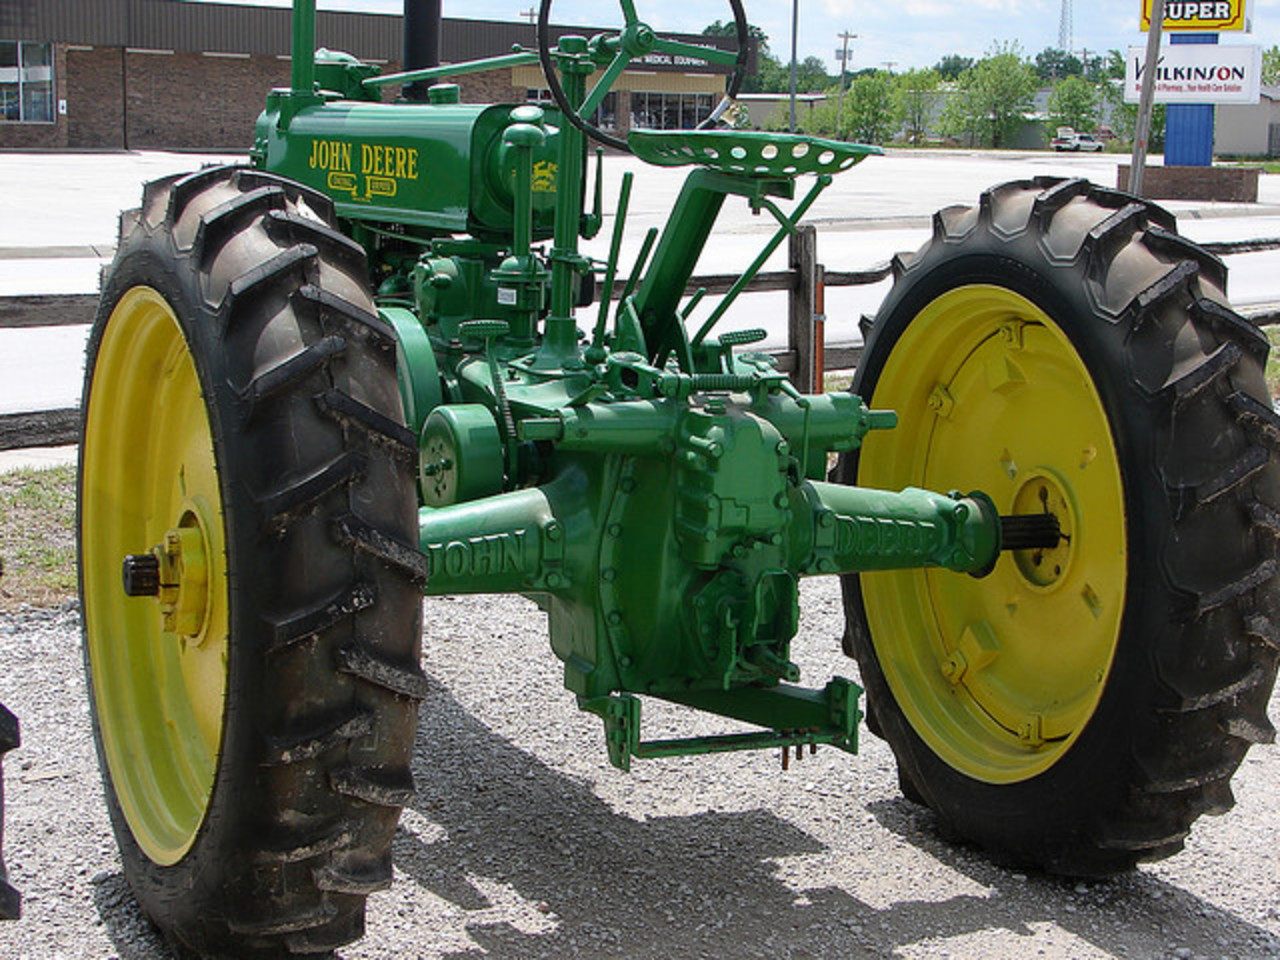 A" or "B" John Deere Tractor | Flickr - Photo Sharing!